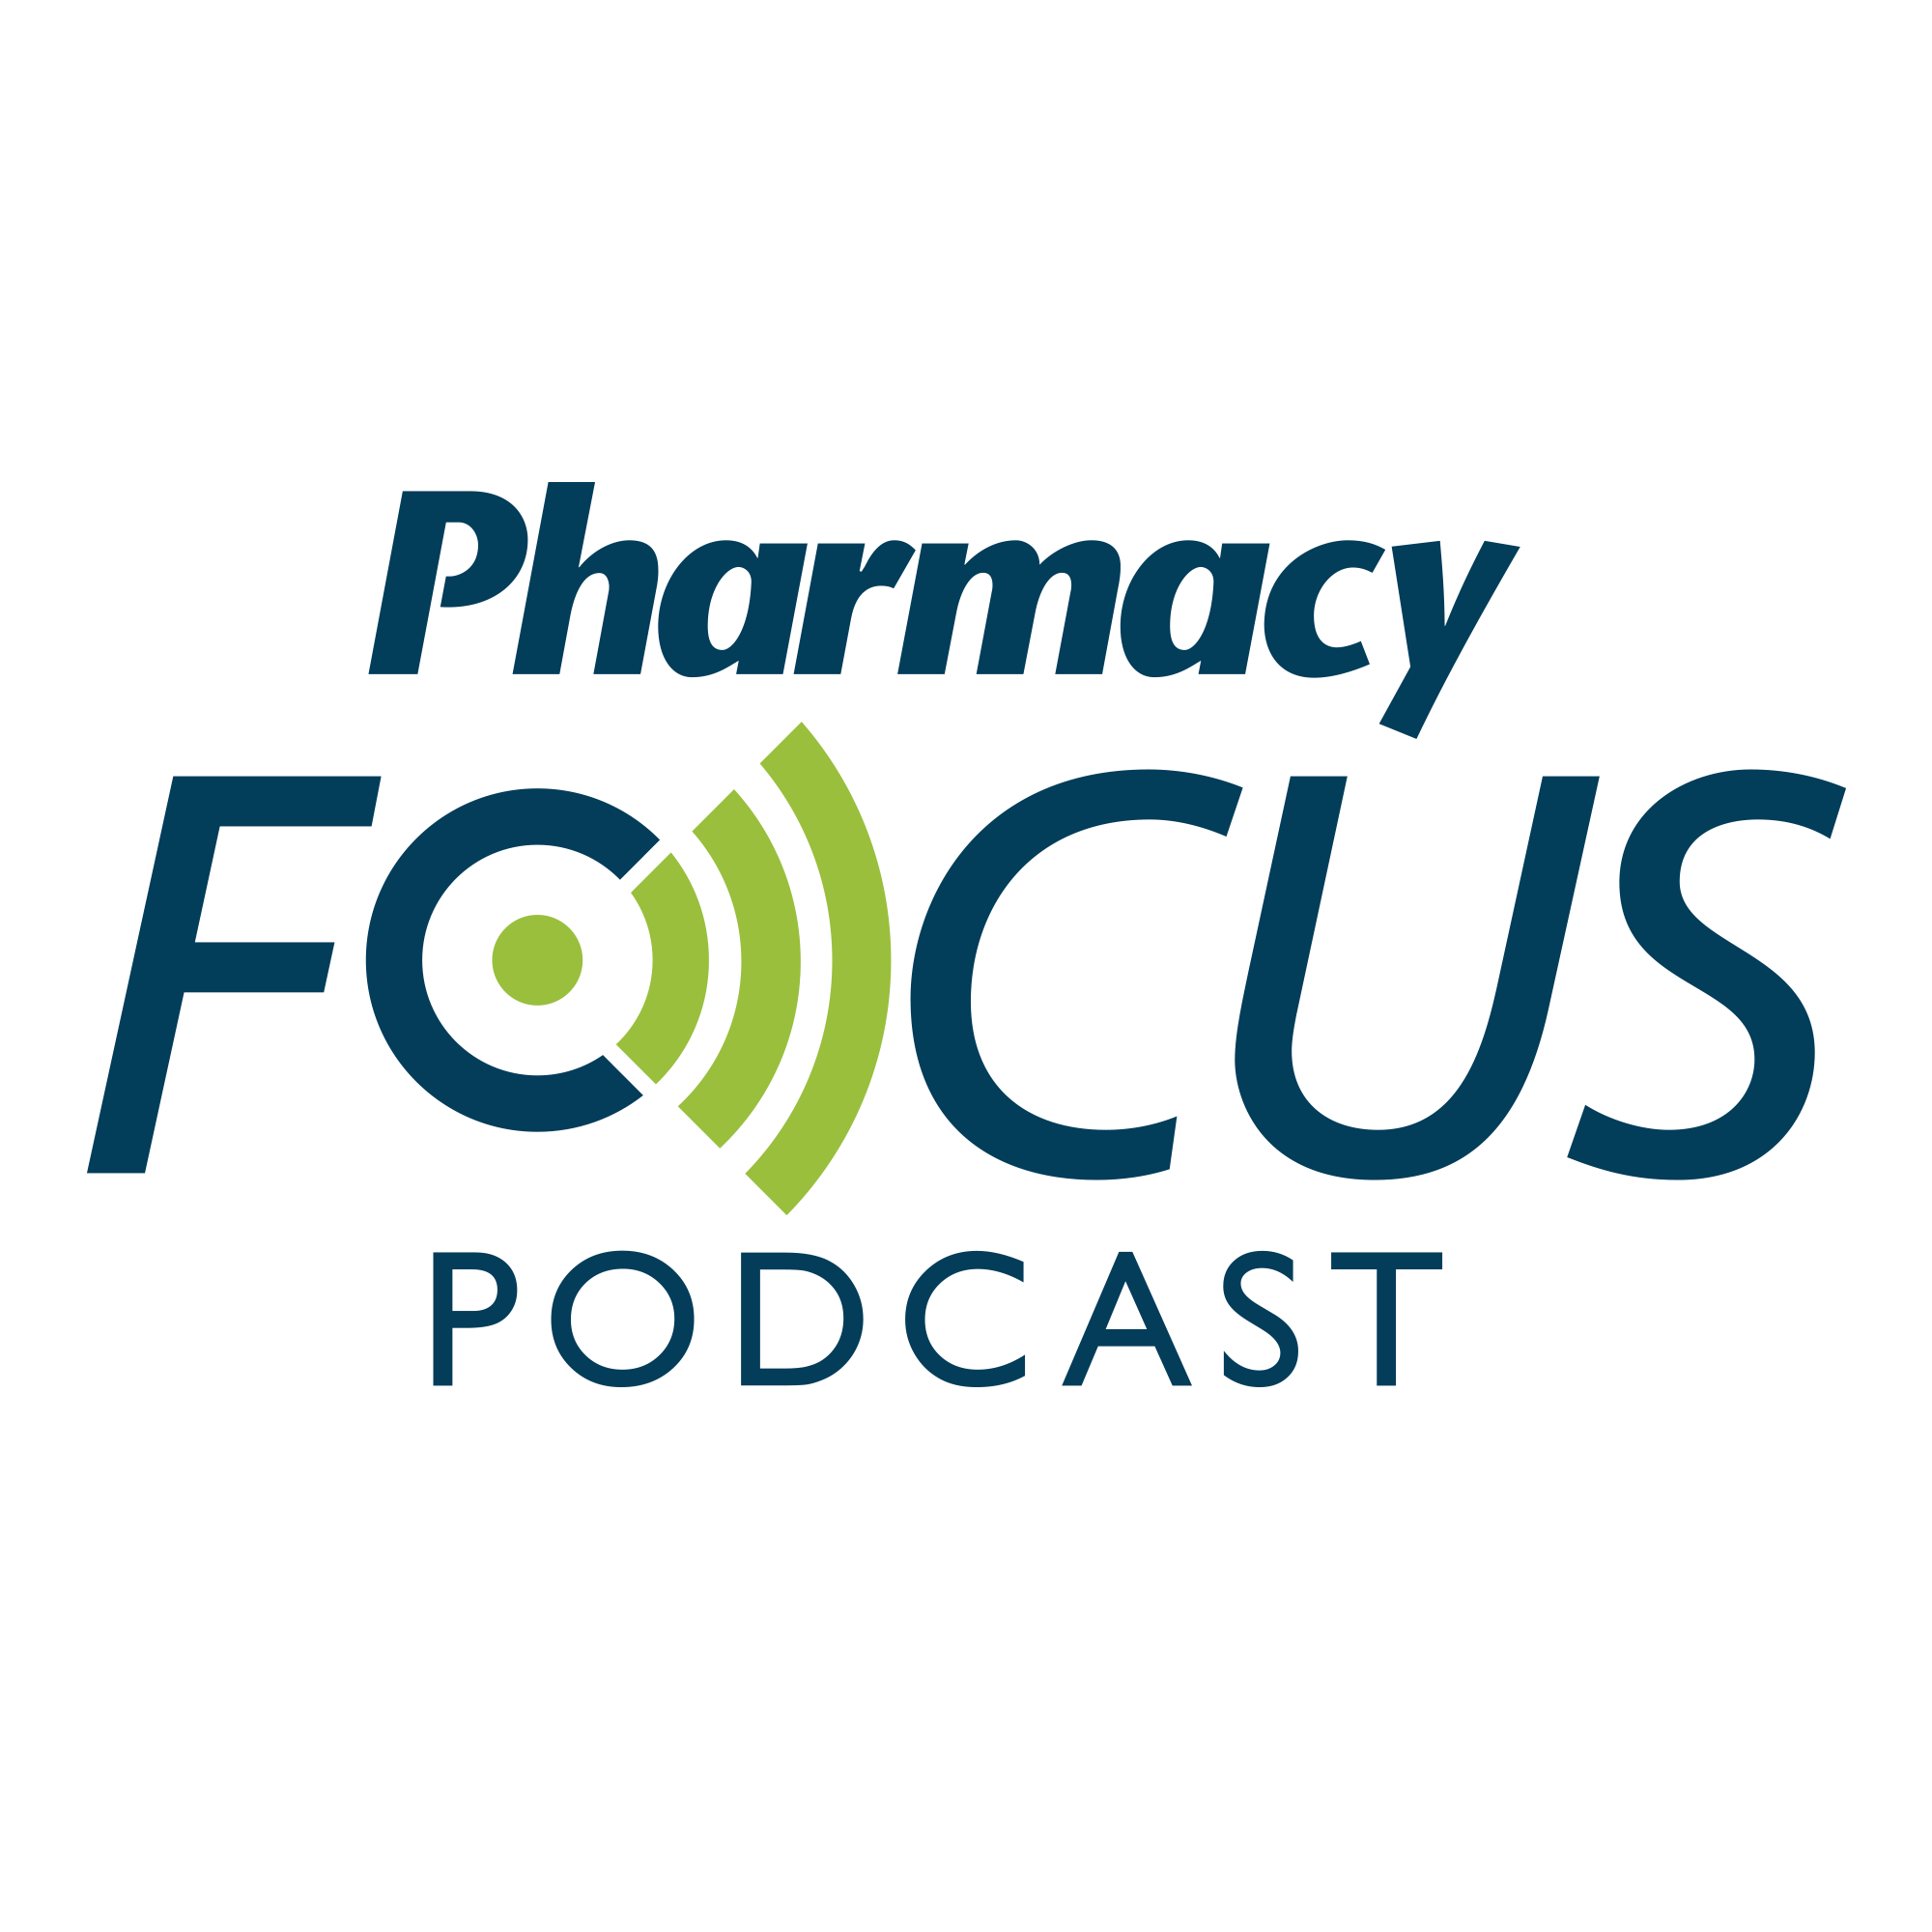 Pharmacy Focus: The Development of "HARMACY," an Upcoming Documentary  